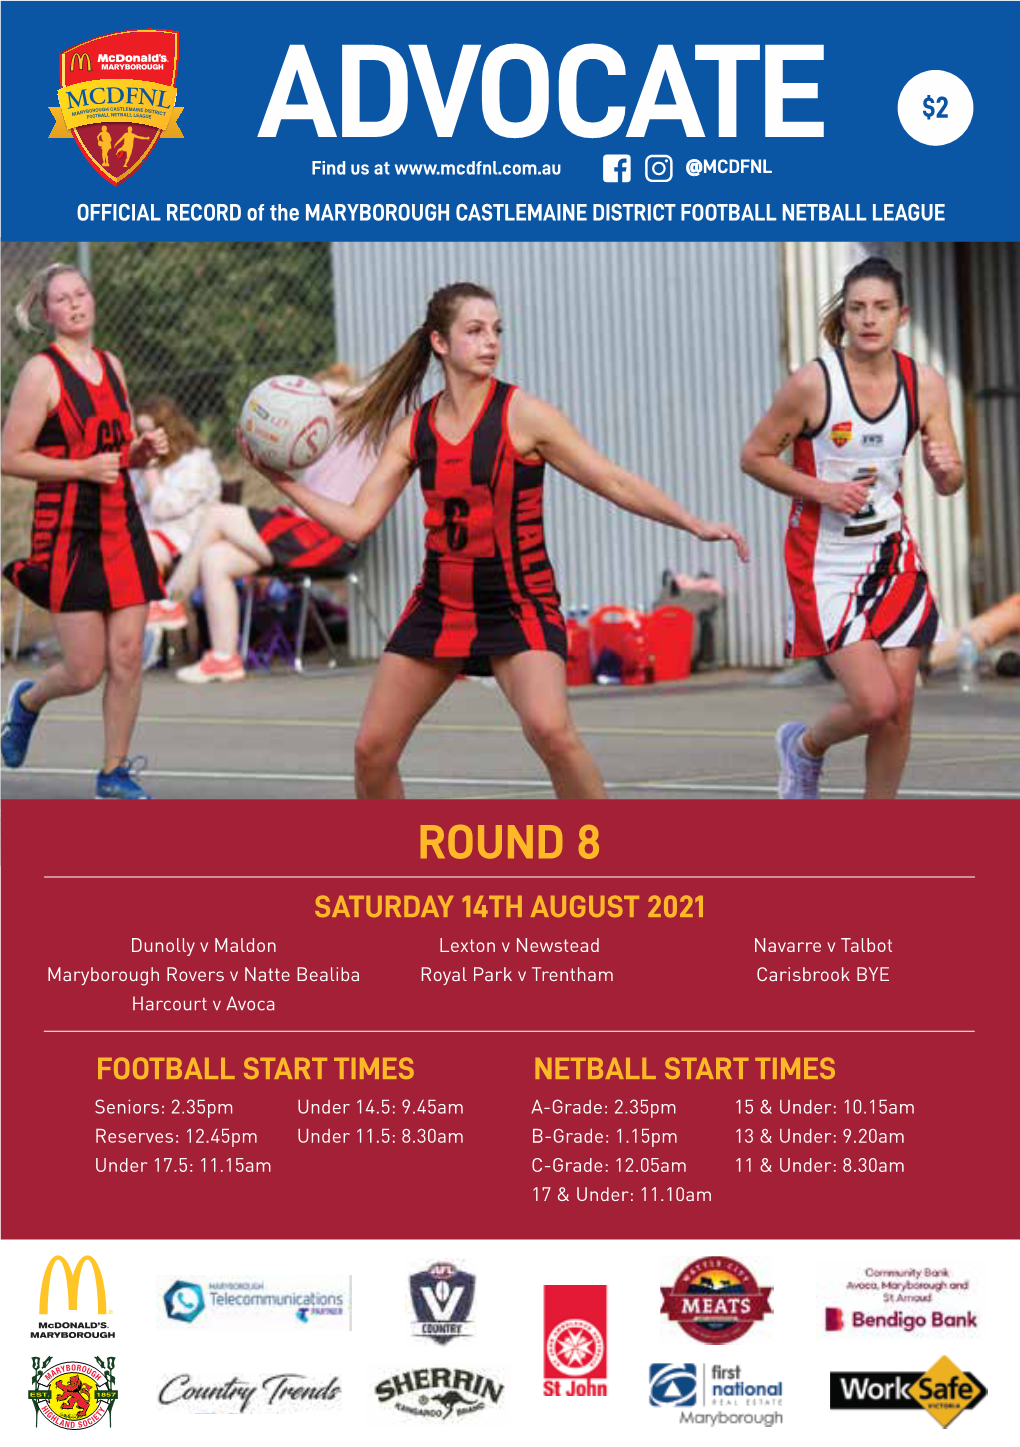 ADVOCATE $2 Find Us at @MCDFNL OFFICIAL RECORD of the MARYBOROUGH CASTLEMAINE DISTRICT FOOTBALL NETBALL LEAGUE